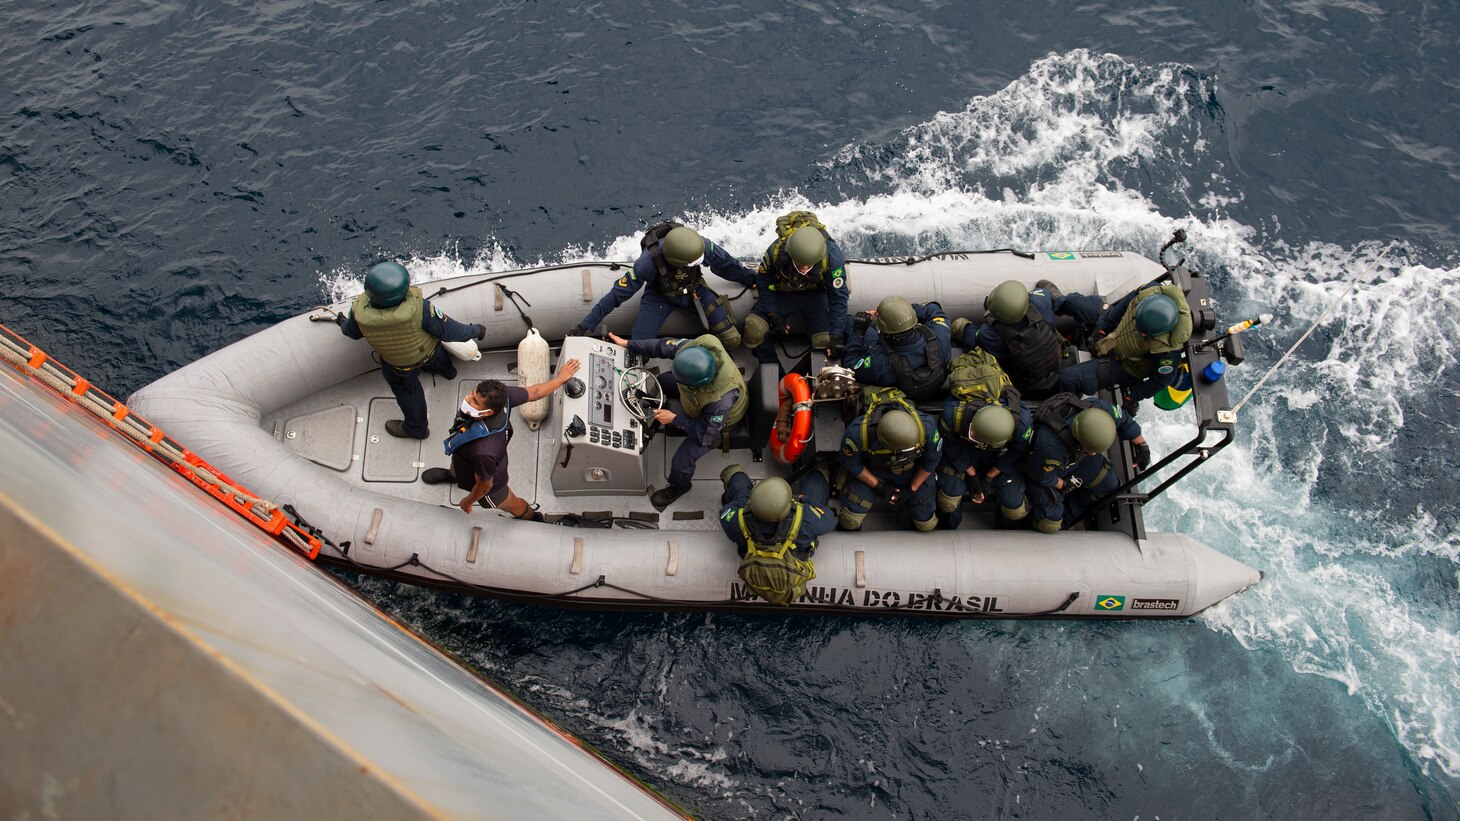 Members of a Brazilian Navy visit, board, search, and seizure (VBSS) team return to their boat following a drill aboard the Expeditionary Sea Base USS Hershel "Woody" Williams (ESB 4), Aug. 22, 2021. Hershel "Woody" Williams is conducting a maritime security capability exercise to build on its existing partnership with the Brazilian Navy and joint interoperability operations with allies and partners during a scheduled deployment in the U.S. Sixth Fleet area of operations in support of U.S. national interests and security in Europe and Africa.